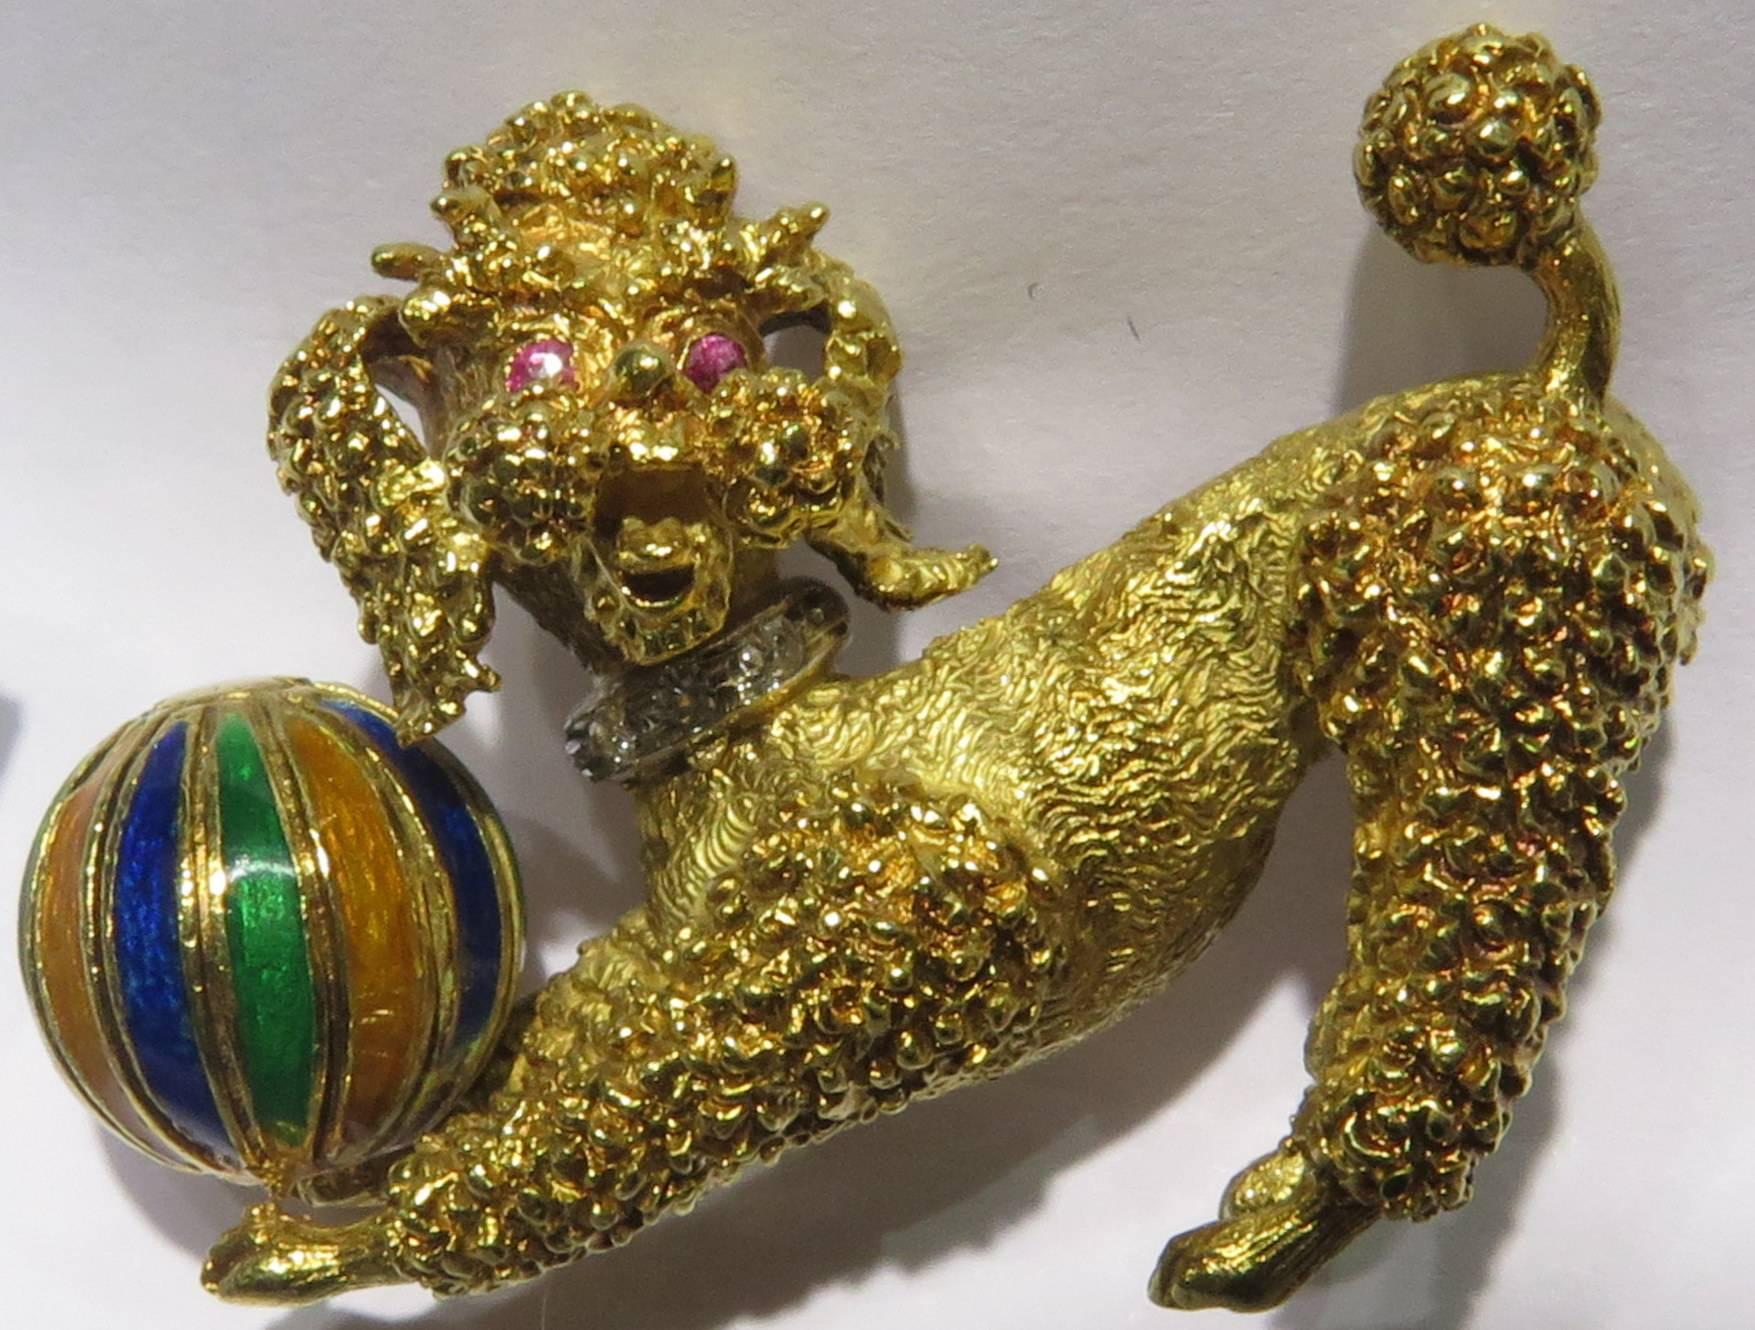 This playful little 18k gold chubby cheeked poodle pin has round faceted ruby eyes and a white gold diamond collar and has an attached green, blue and enamel ball that he loves playing with. This pin is numbered, but I can not find a signature on